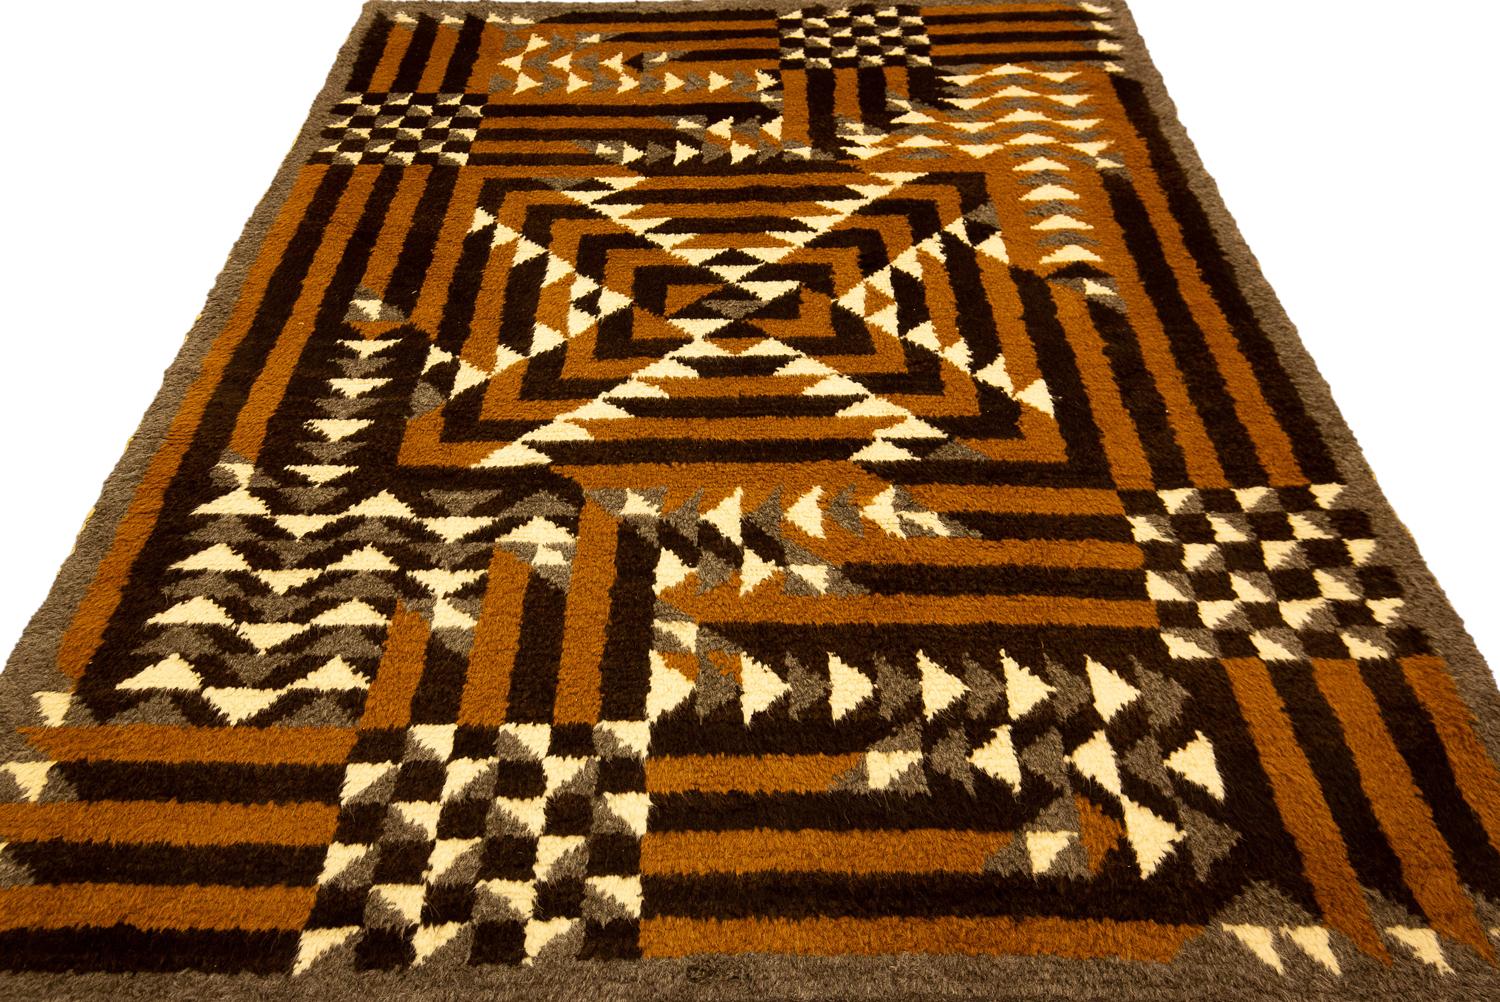 This is a semi-antique European Art Deco hand-knotted rug woven during the second quarter of the 20th century circa 1920 - 1950s and measures 230 x 170CM in size. This piece has a highly geometric design with squares creating a checkerboard and a